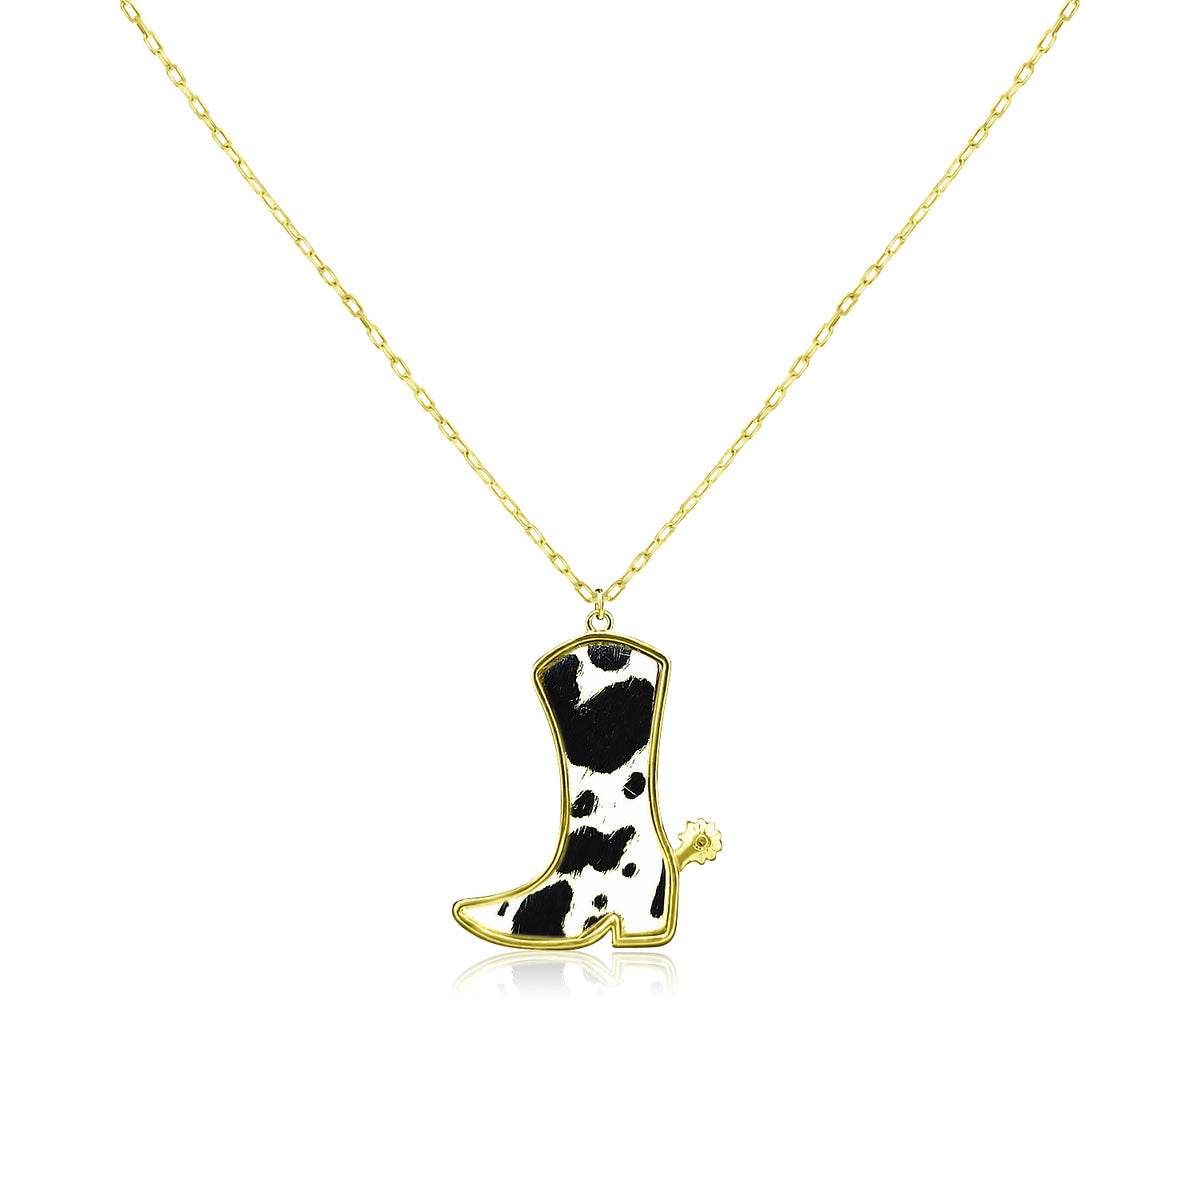 Cow Boots Cow Print Necklace